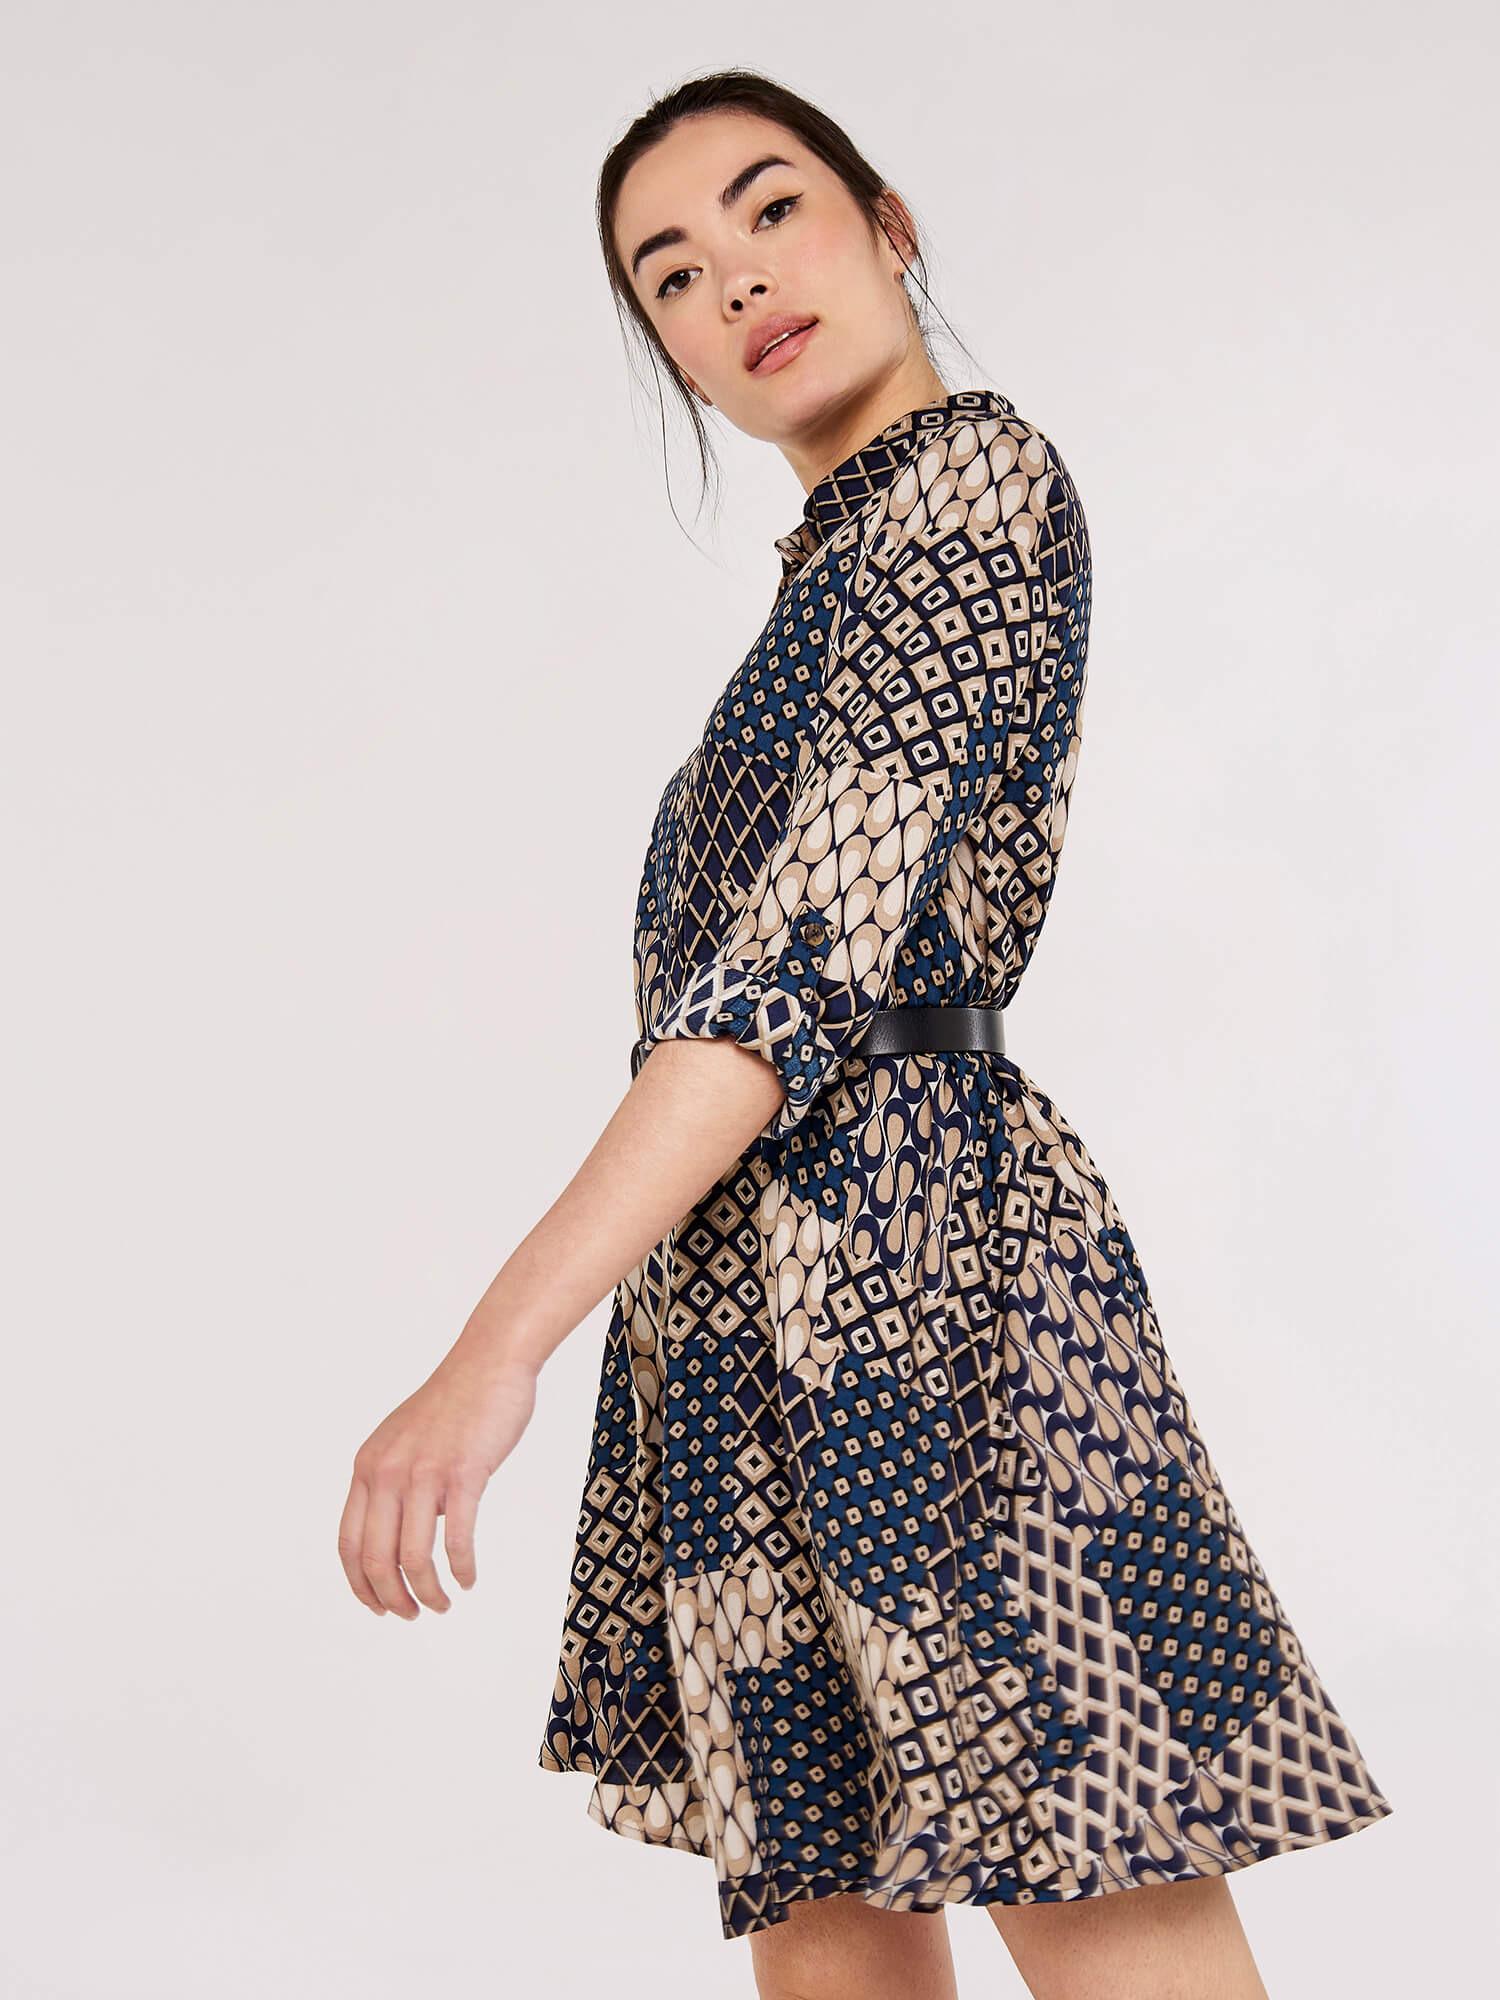 Make a statement with the Apricot Patchwork Swing Shirt Dress. This dress features an eye-catching patchwork pattern and a swing silhoue